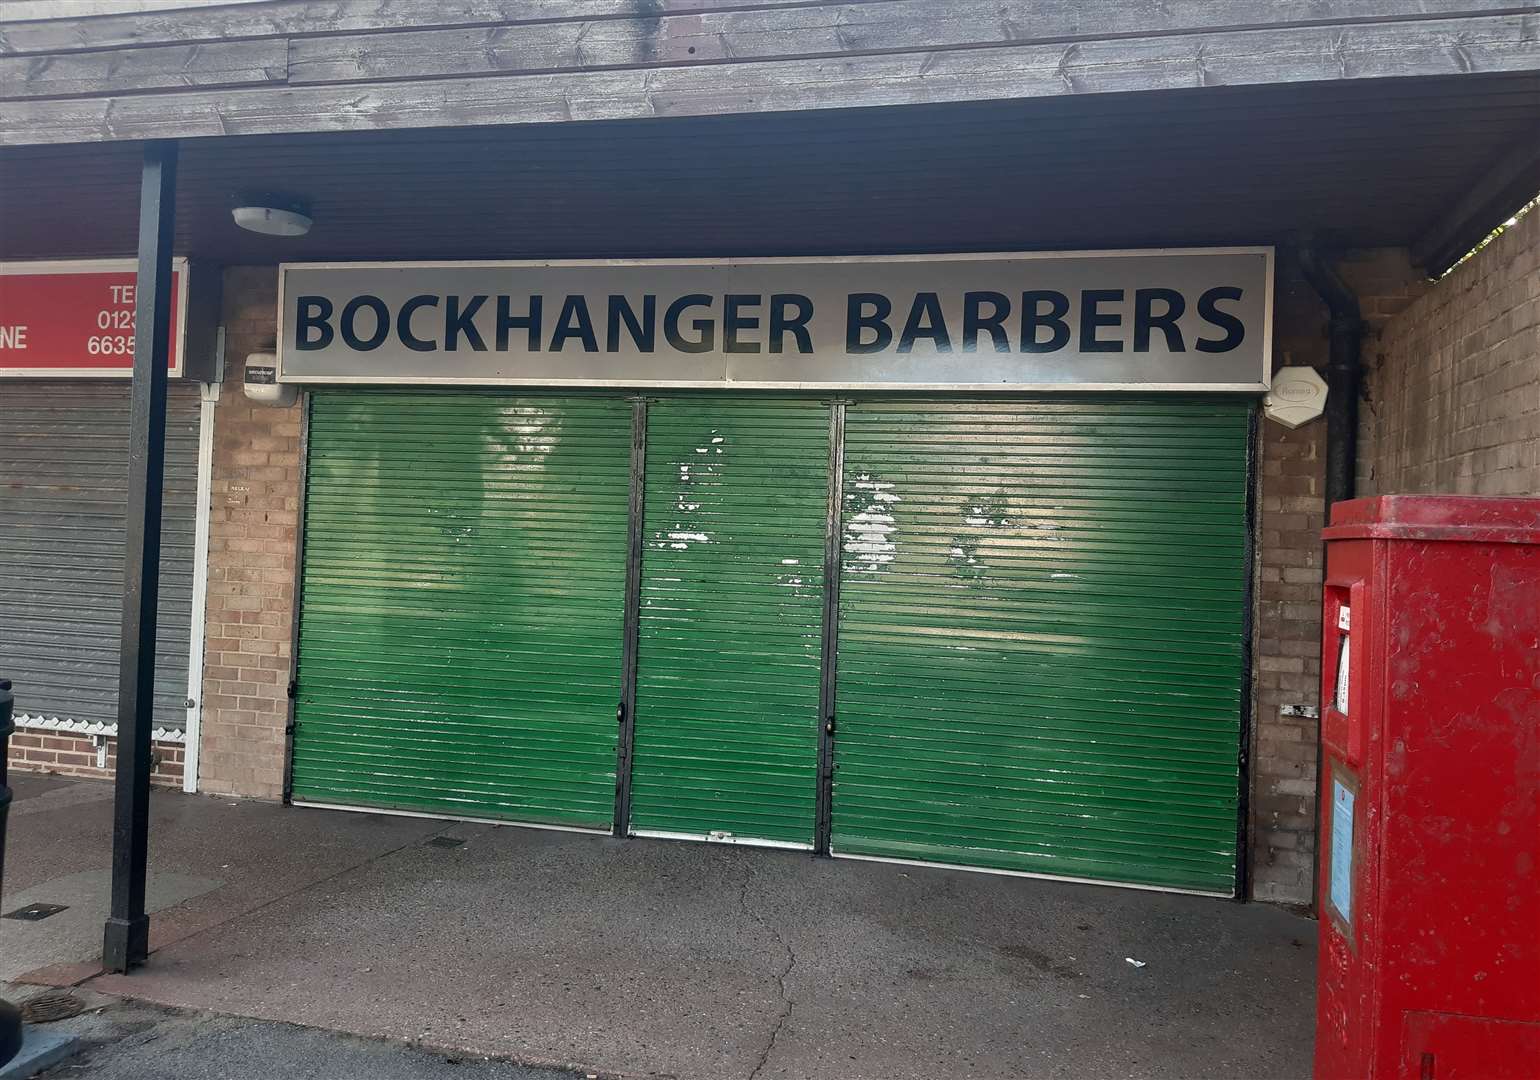 Bockhanger Barbers is now in the former Post Office site